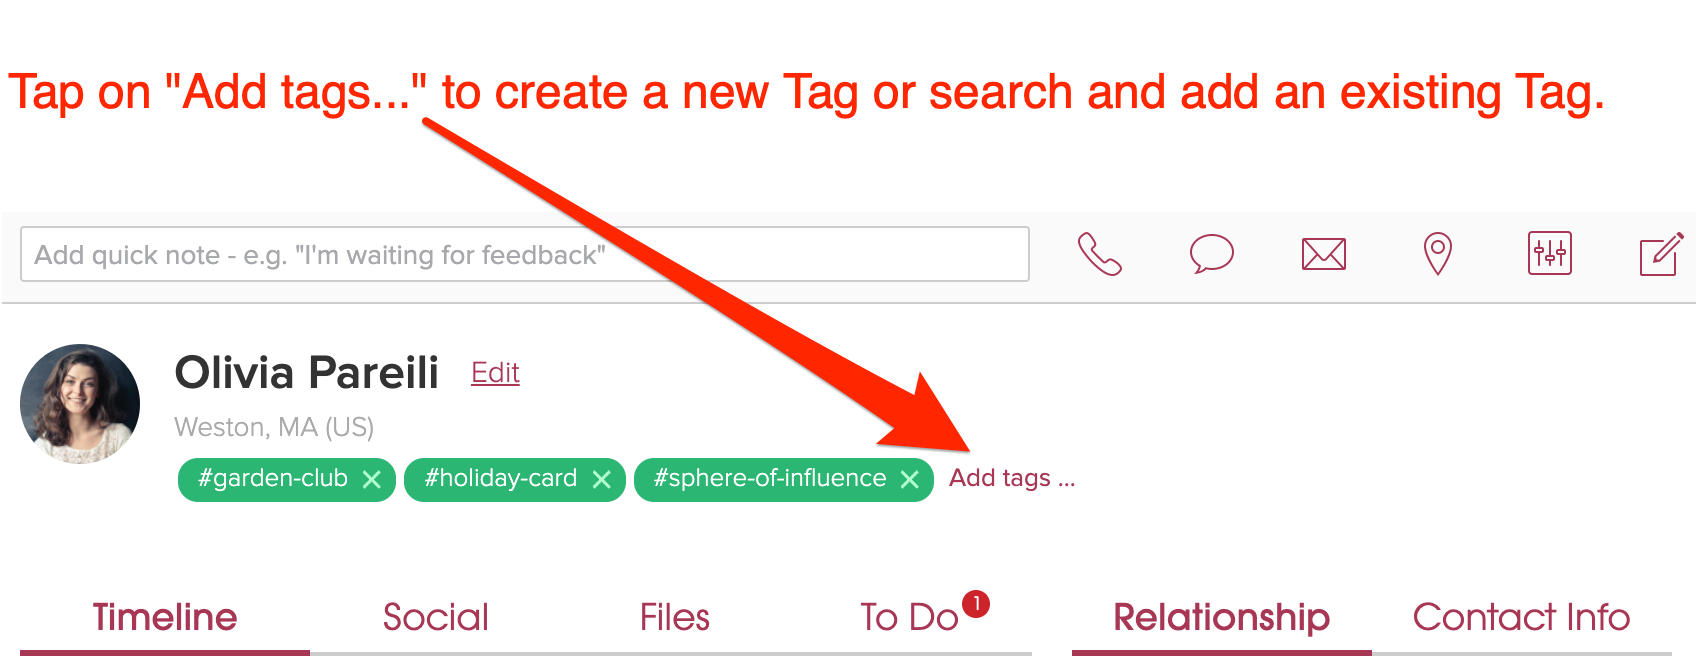 Cloze person add a new tag or search and add an existing tag.  